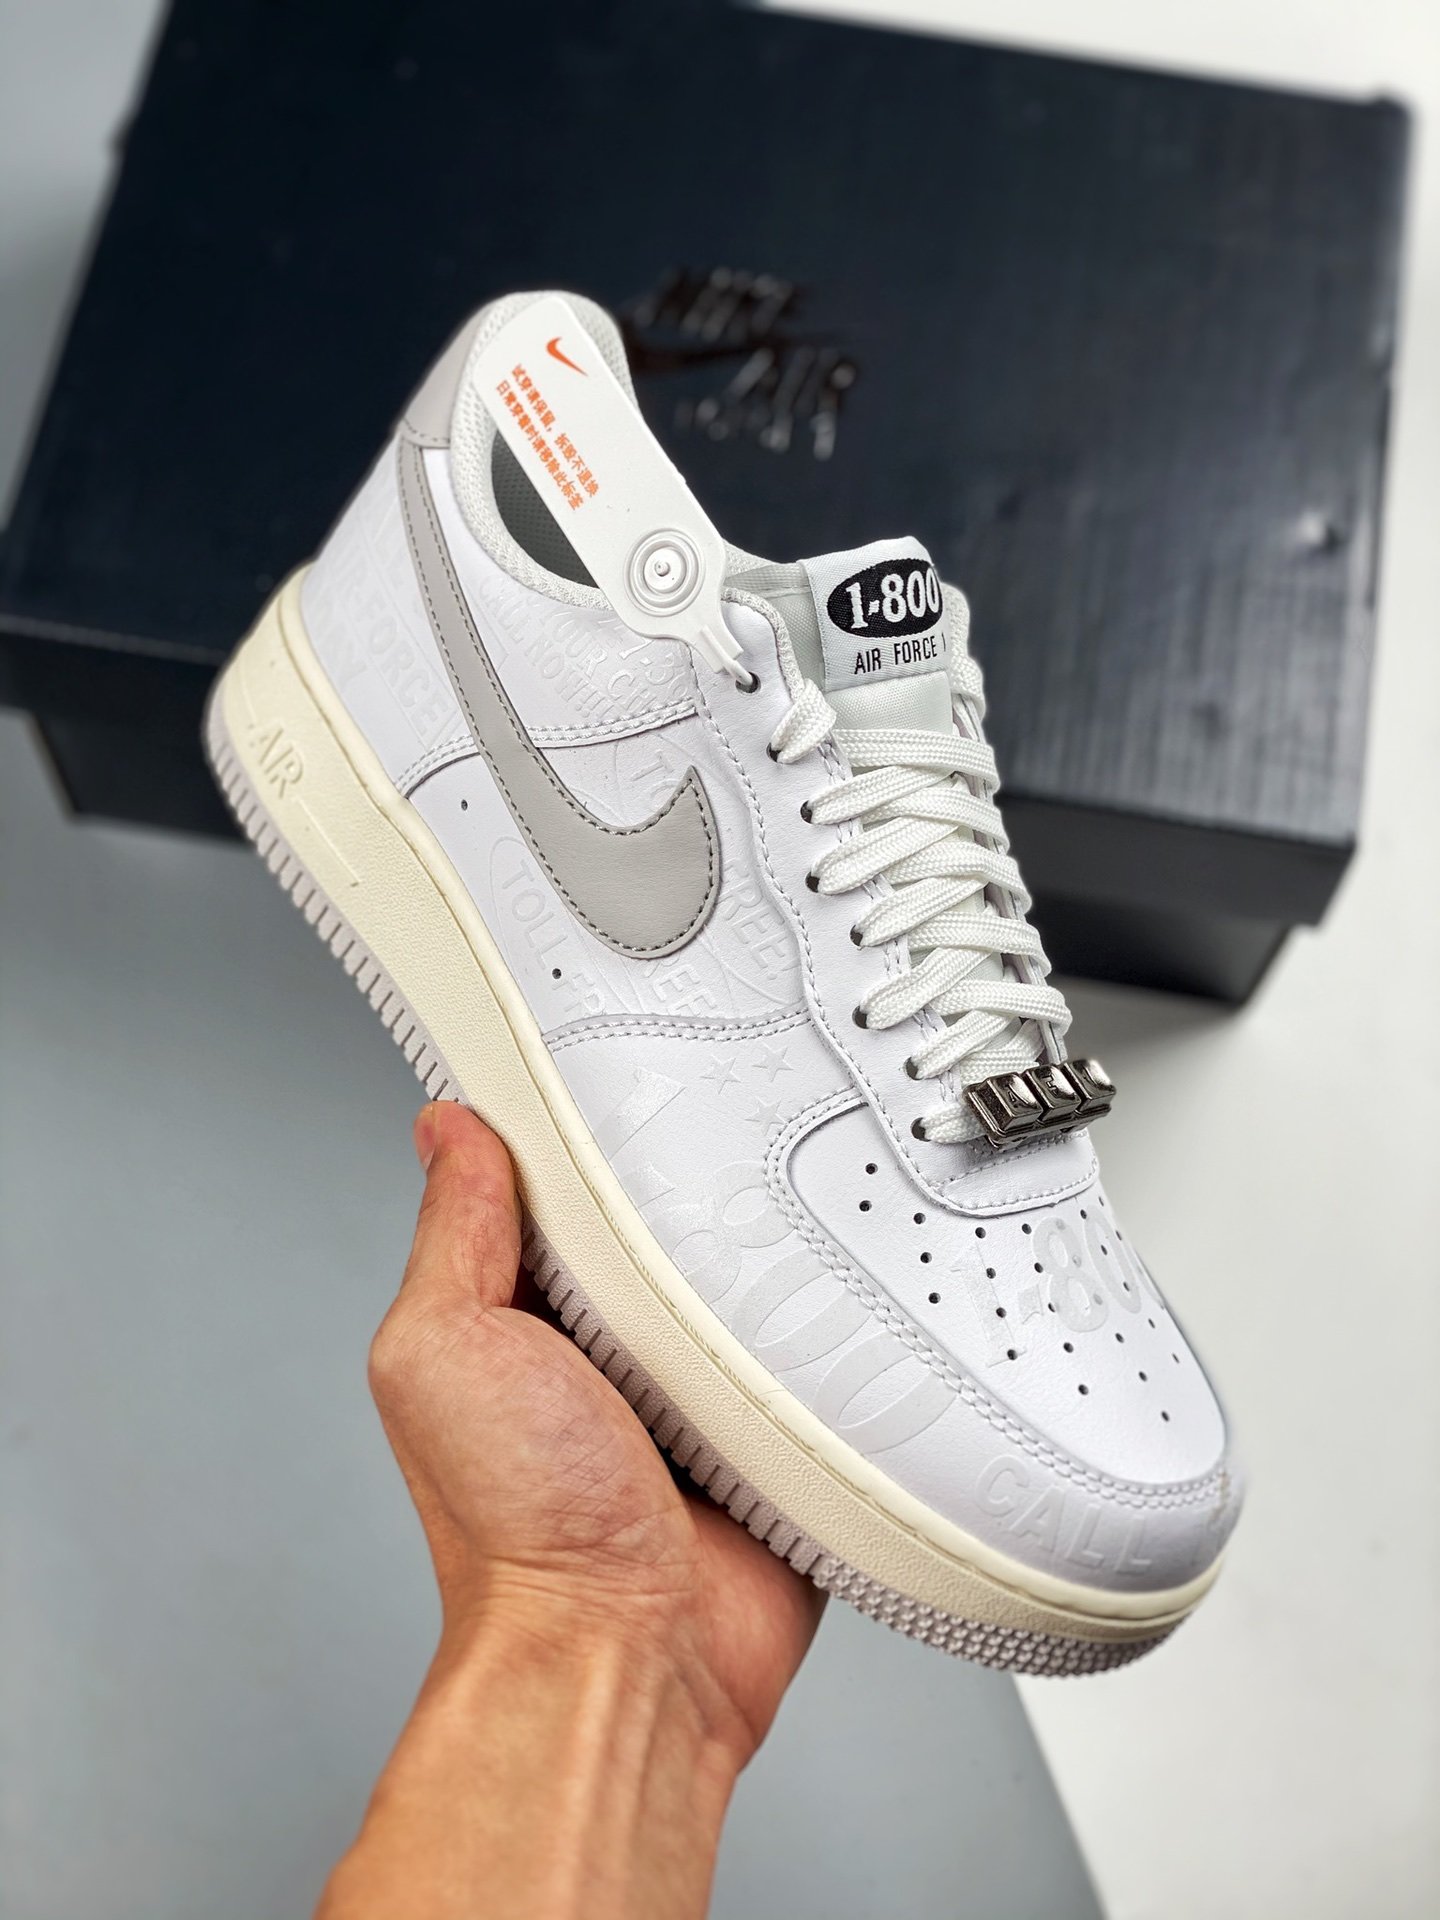 Nike Air Force 1 Low '1-800' White/Vast Grey-Sail-Black For Sale